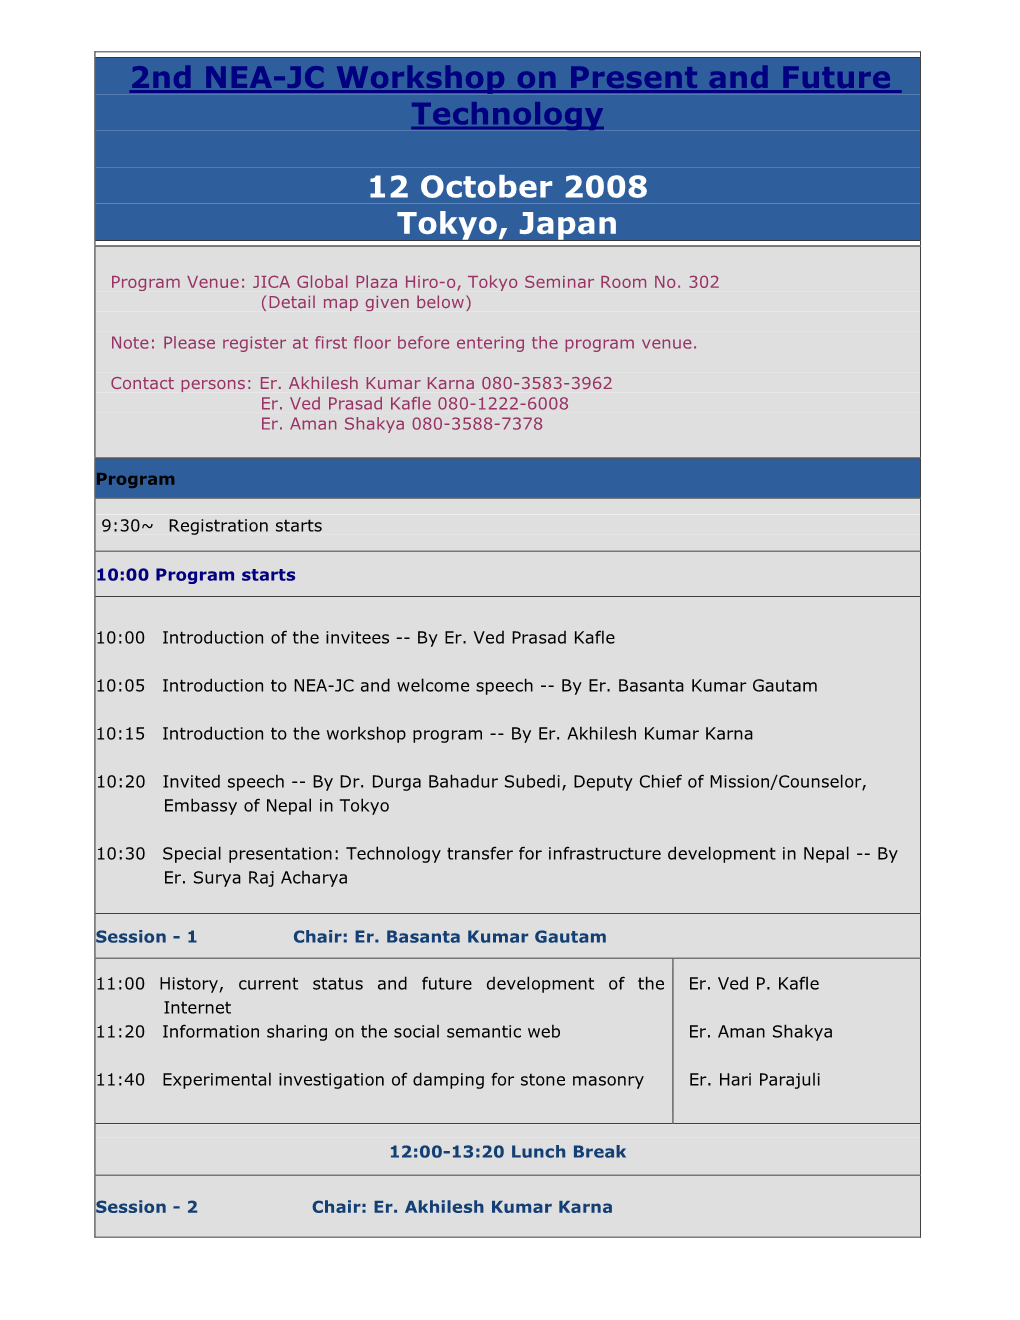 2Nd NEA-JC Workshop on Present and Future Technology 12 October